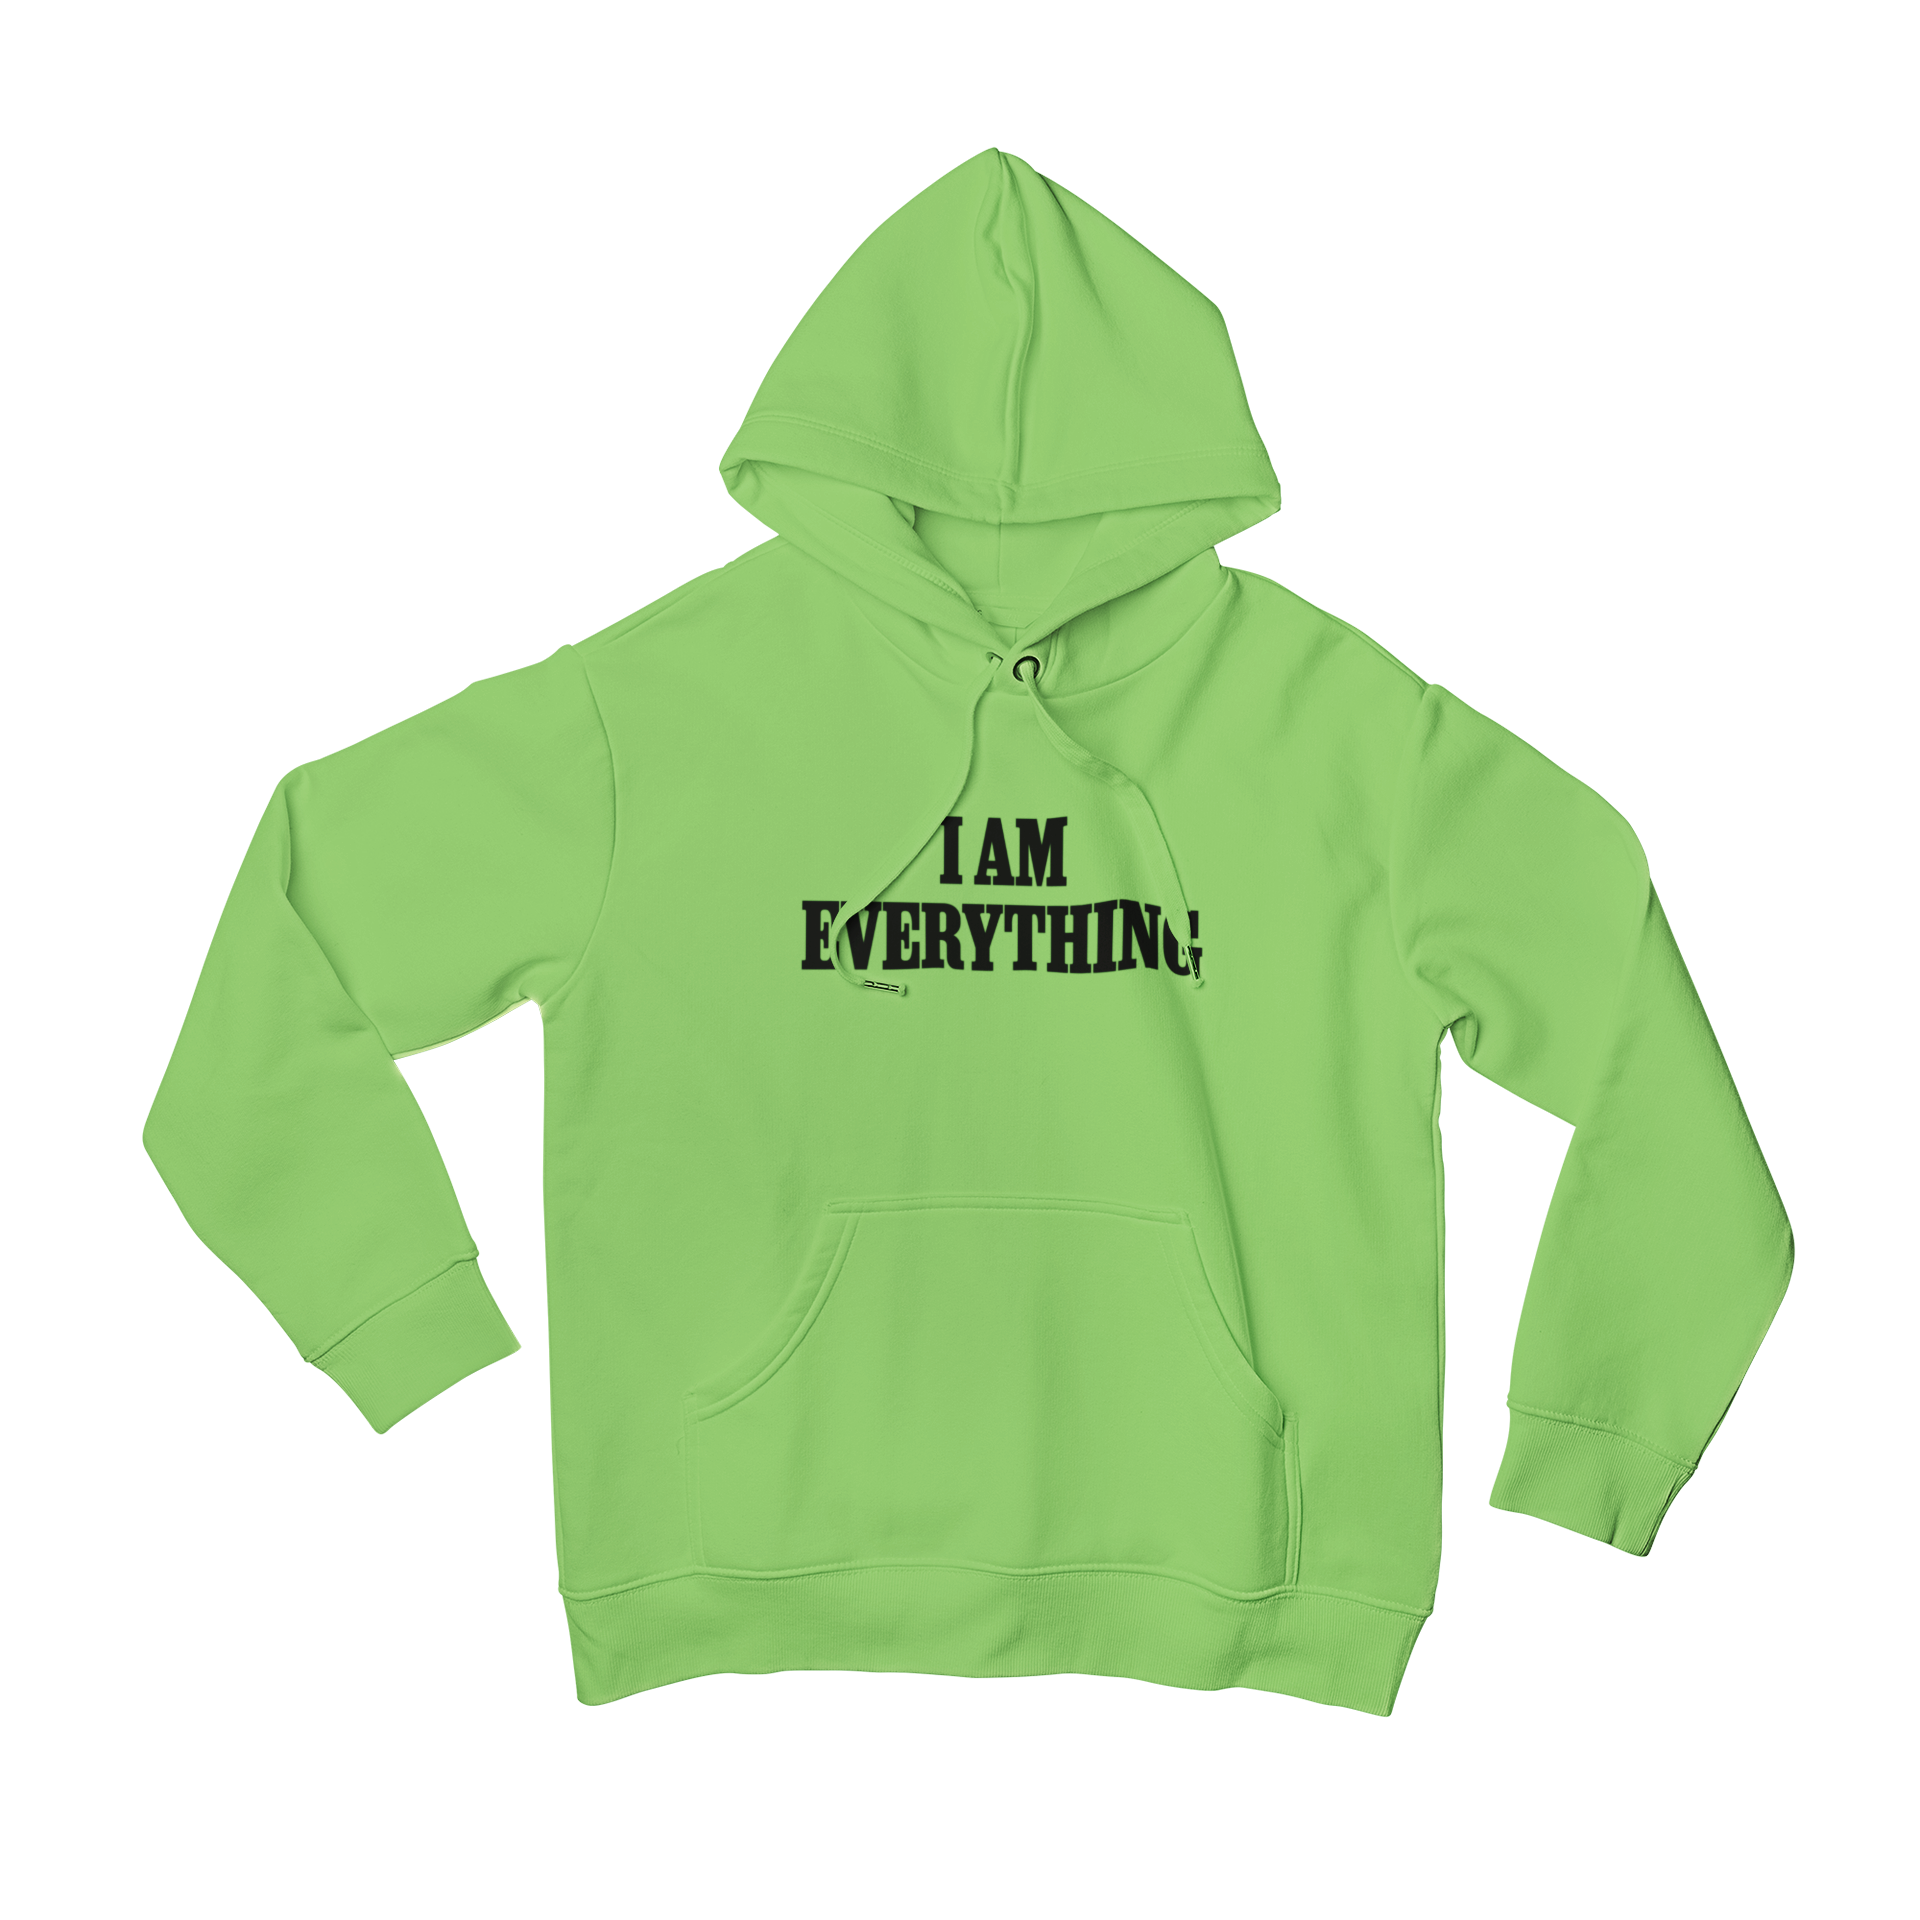 With our "I Am Everything" matching slogan hoodie, you can proudly proclaim your self-confidence and style. Made to perfectly pair with our "I Have Everything" hoodie, this statement piece is a must-have for anyone who knows their worth. Embrace your uniqueness with this bold and empowering design.